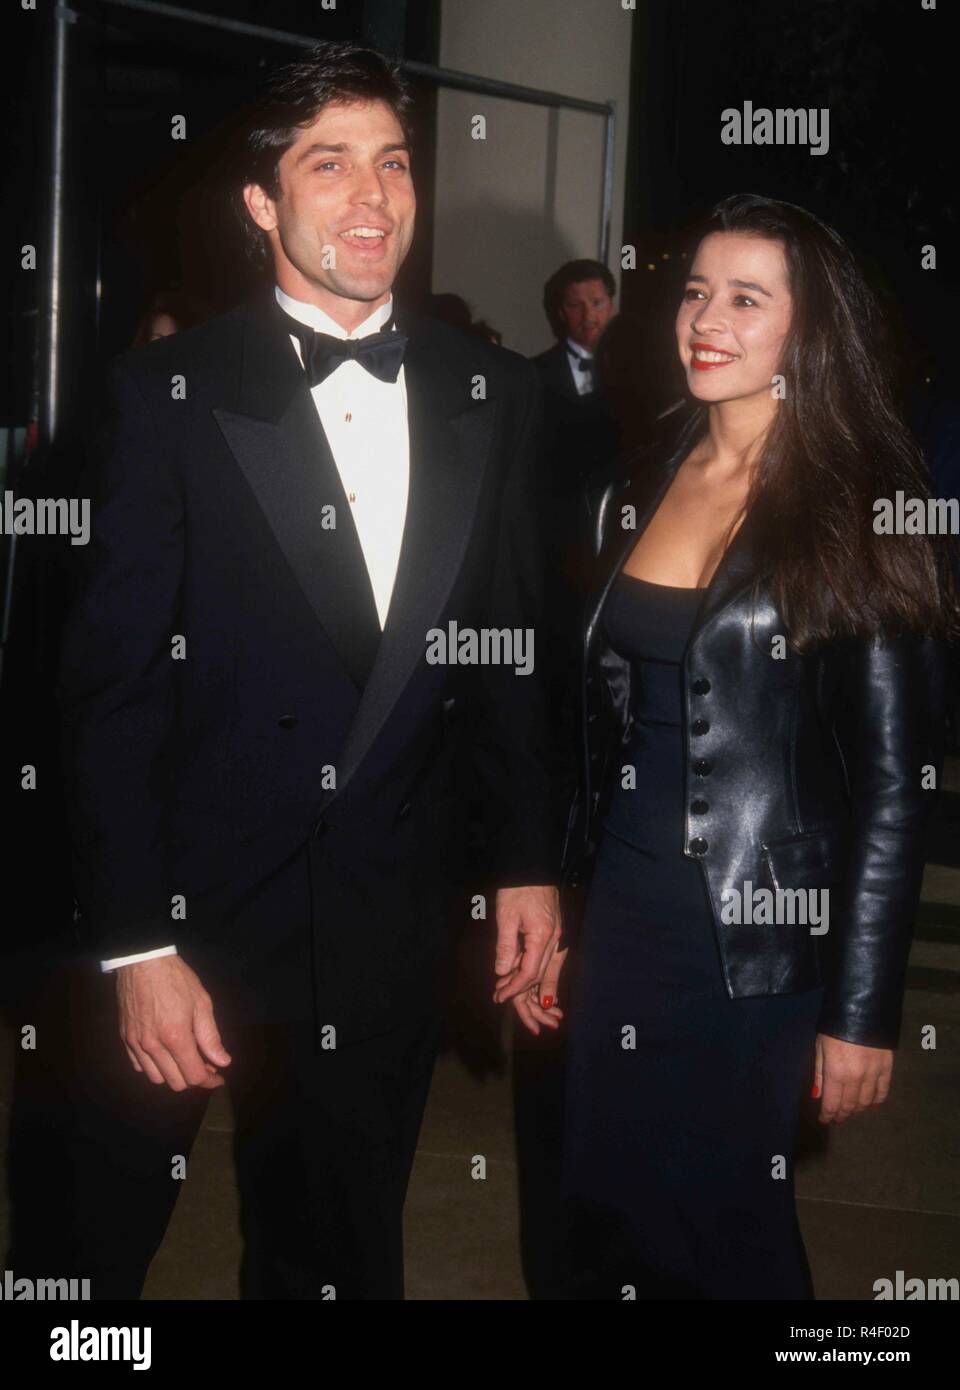 BEVERLY HILLS, CA - FEBRUARY 26: Actor Gerard Christopher attends the Ninth Annual Soap Opera Digest Awards on February 26, 1993 at the Beverly Hilton Hotel in Beverly Hills, California. Photo by Barry King/Alamy Stock Photo Stock Photo